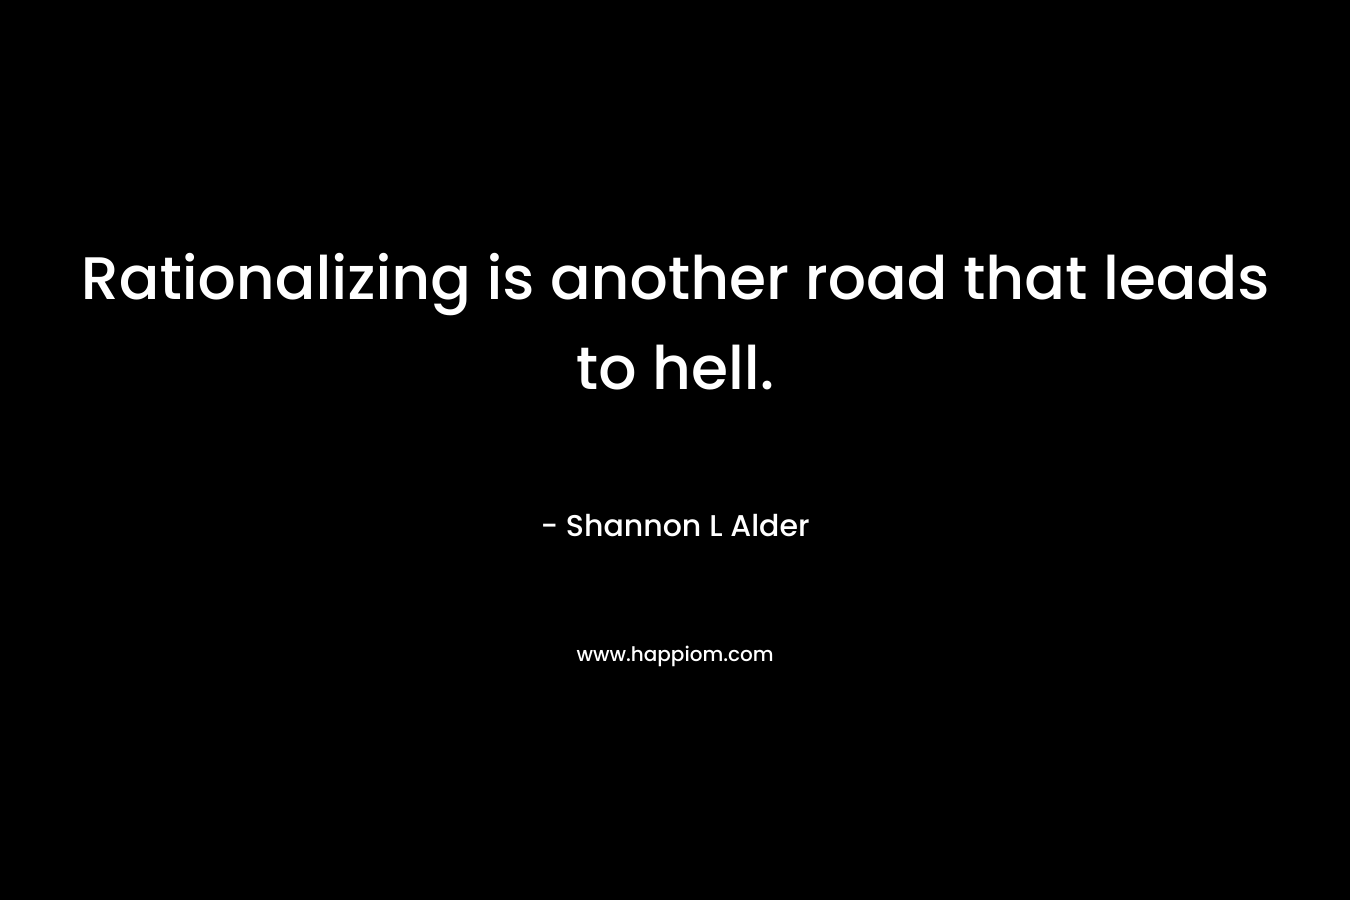 Rationalizing is another road that leads to hell. – Shannon L Alder